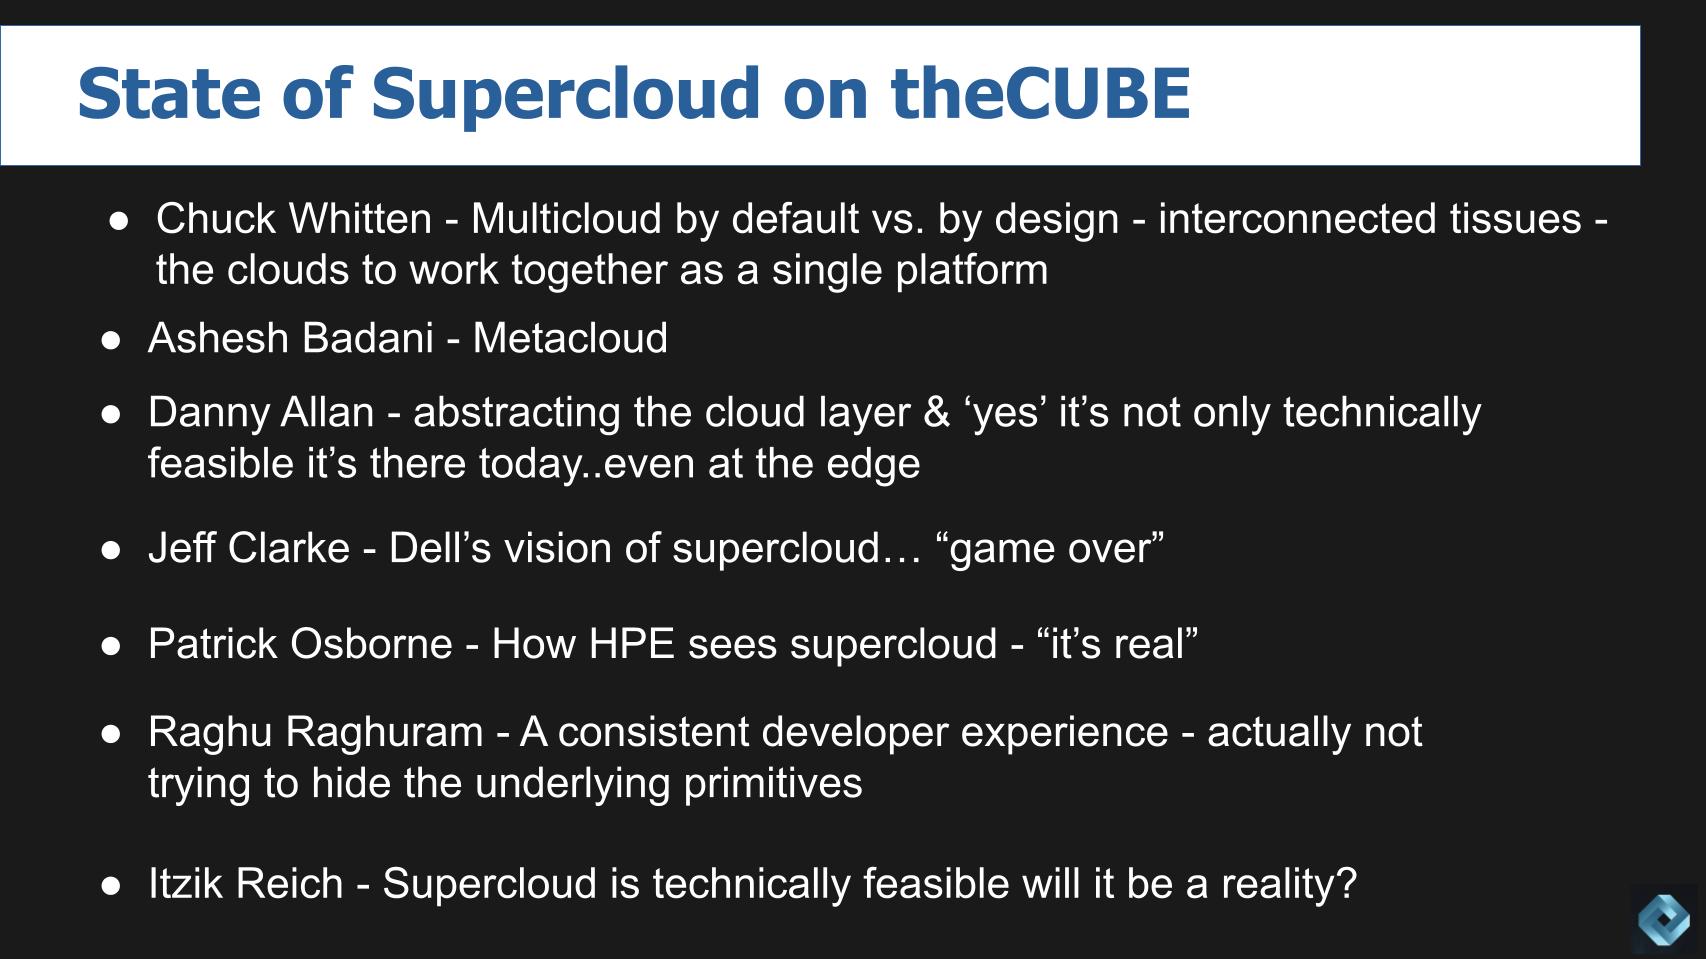 Quotes on supercloud by executives, technical experts, CTOs, product developers and industry leaders